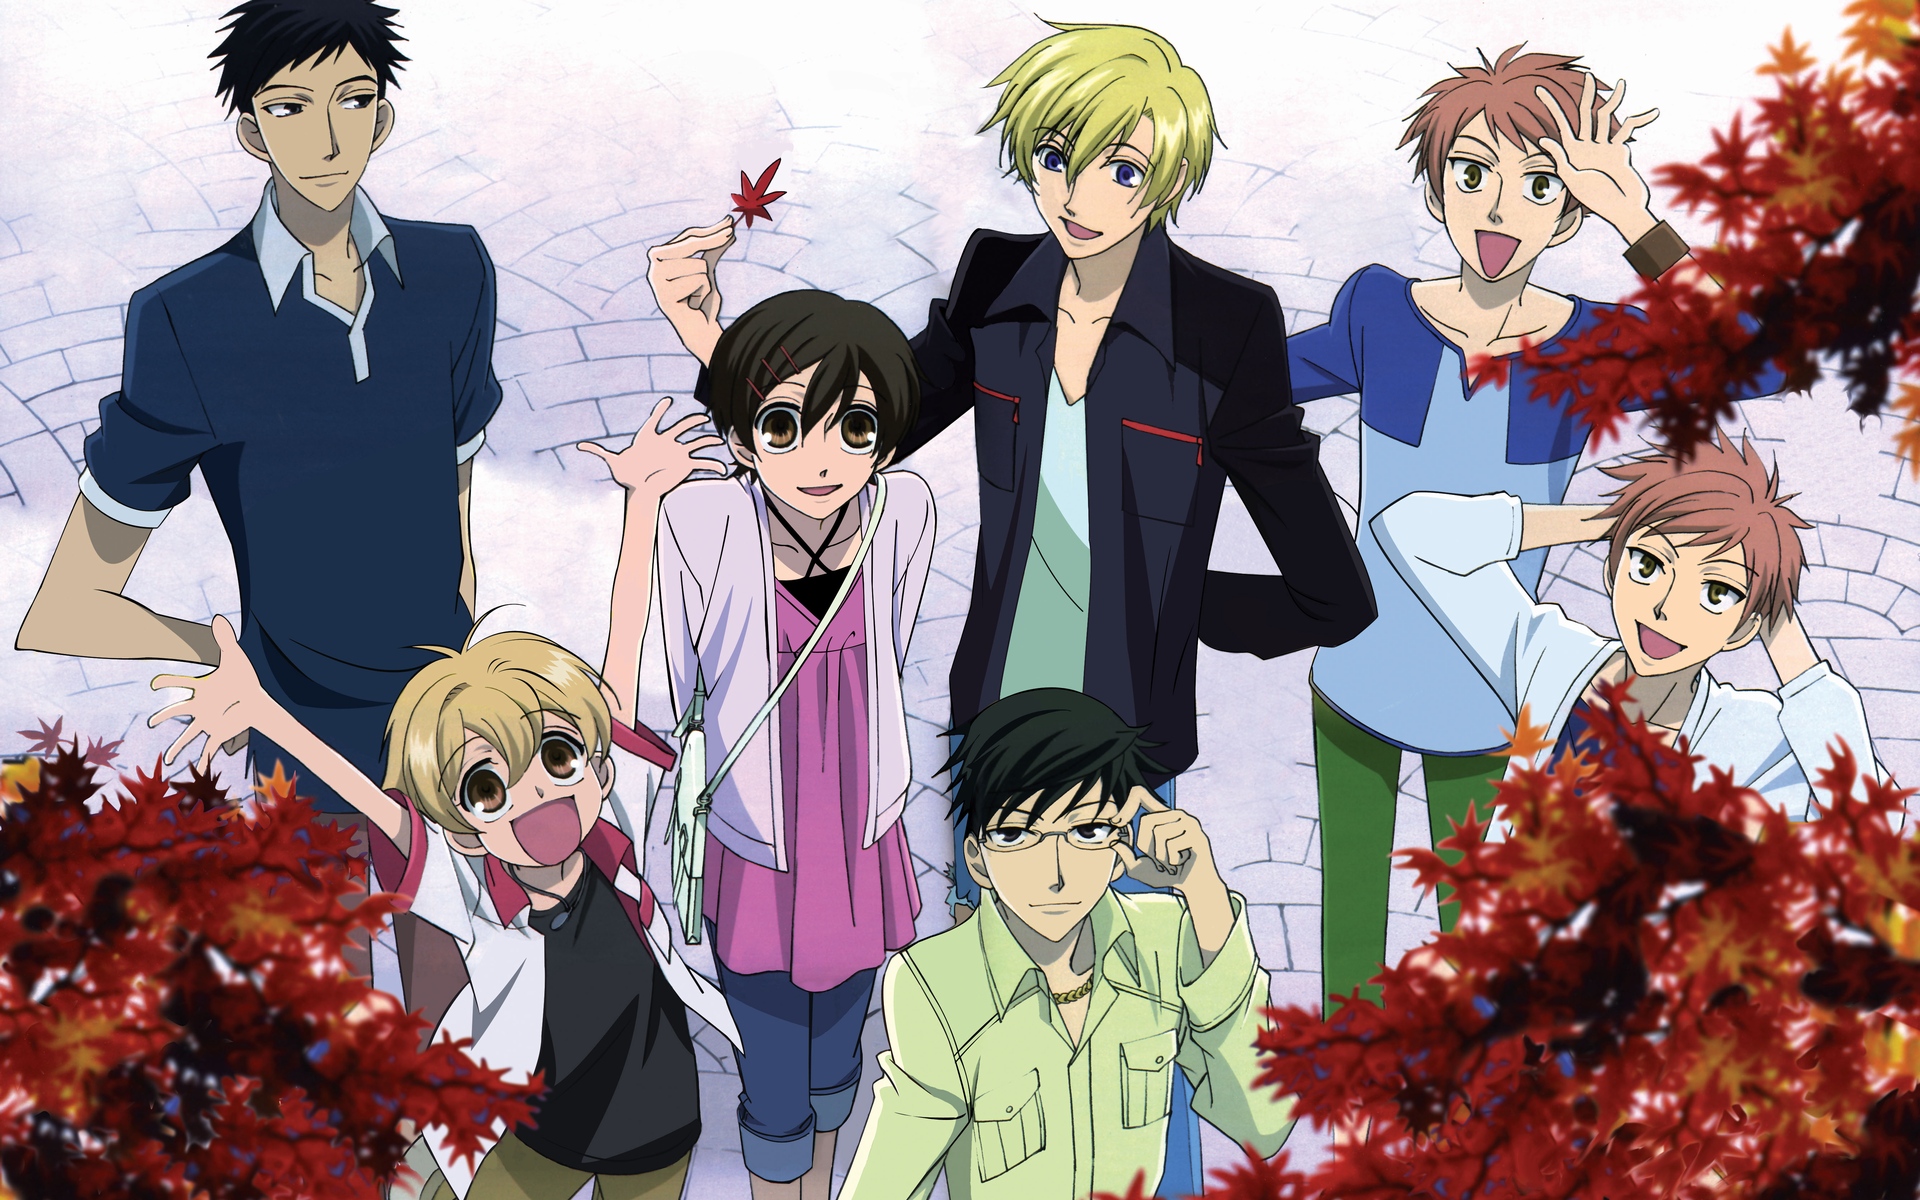 HD desktop wallpaper featuring characters from Ouran High School Host Club with a fall-themed backdrop.